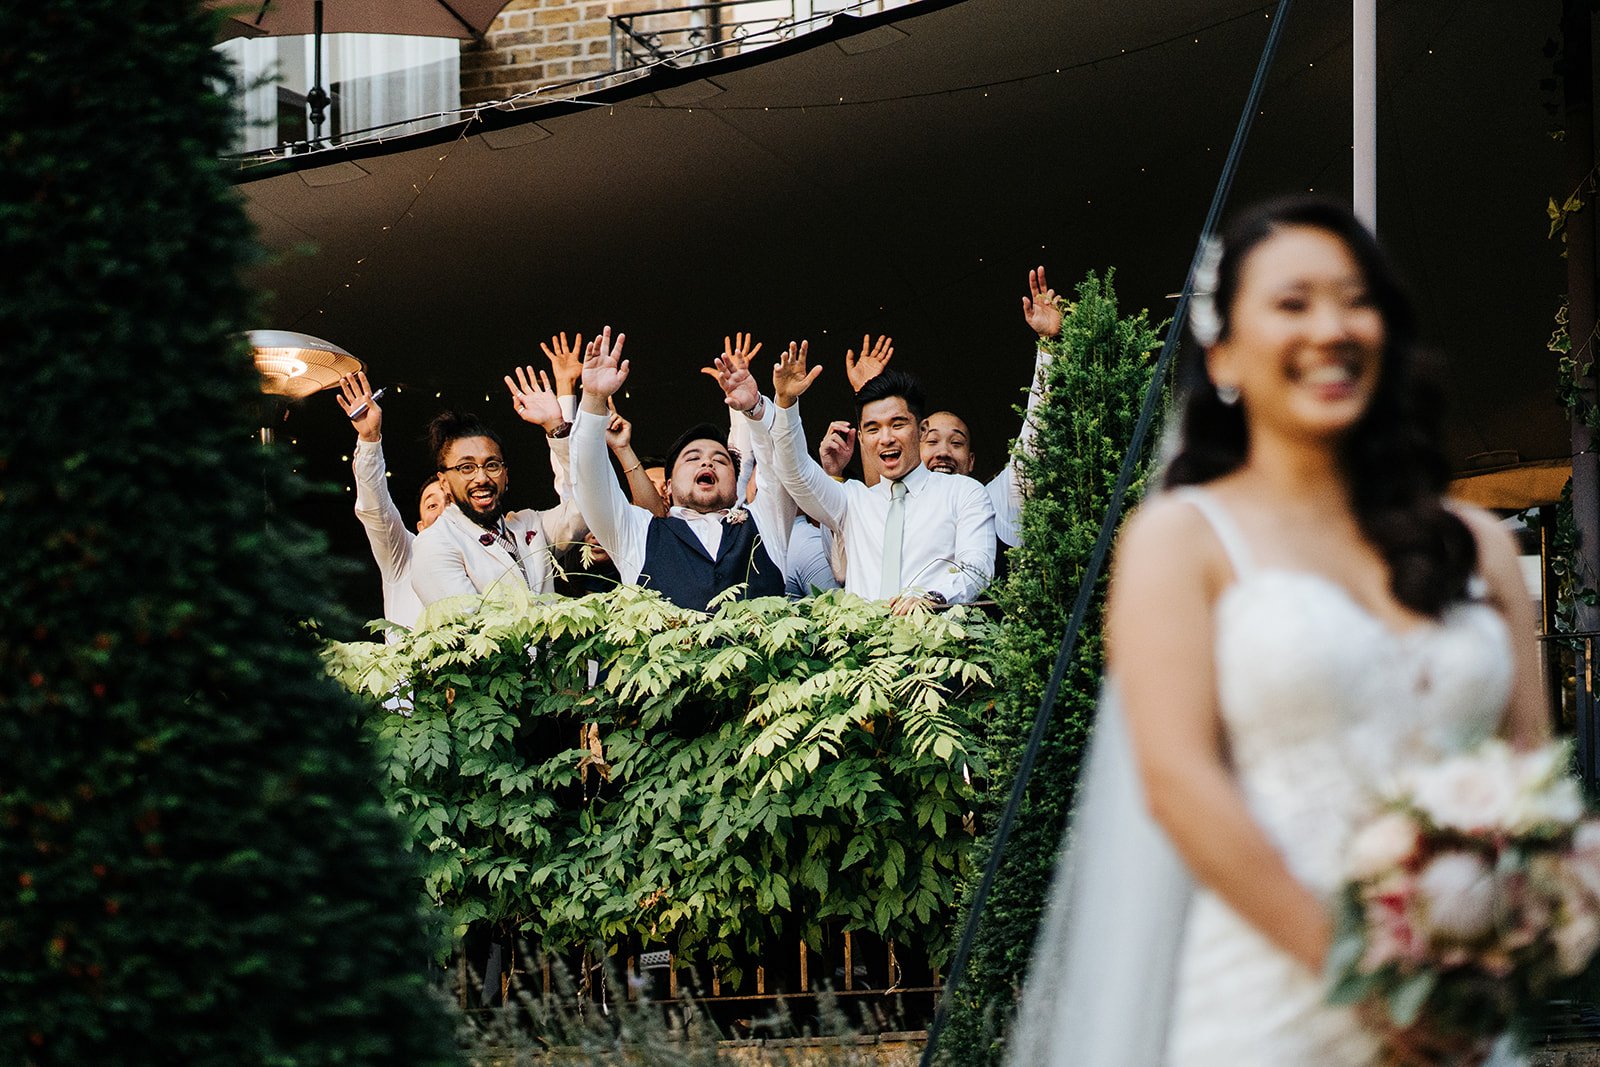 Bride, front and out of focus, smiles as group of friends stand a few metres back and cheer her on during photo session at Bingham Riverhouse gardens